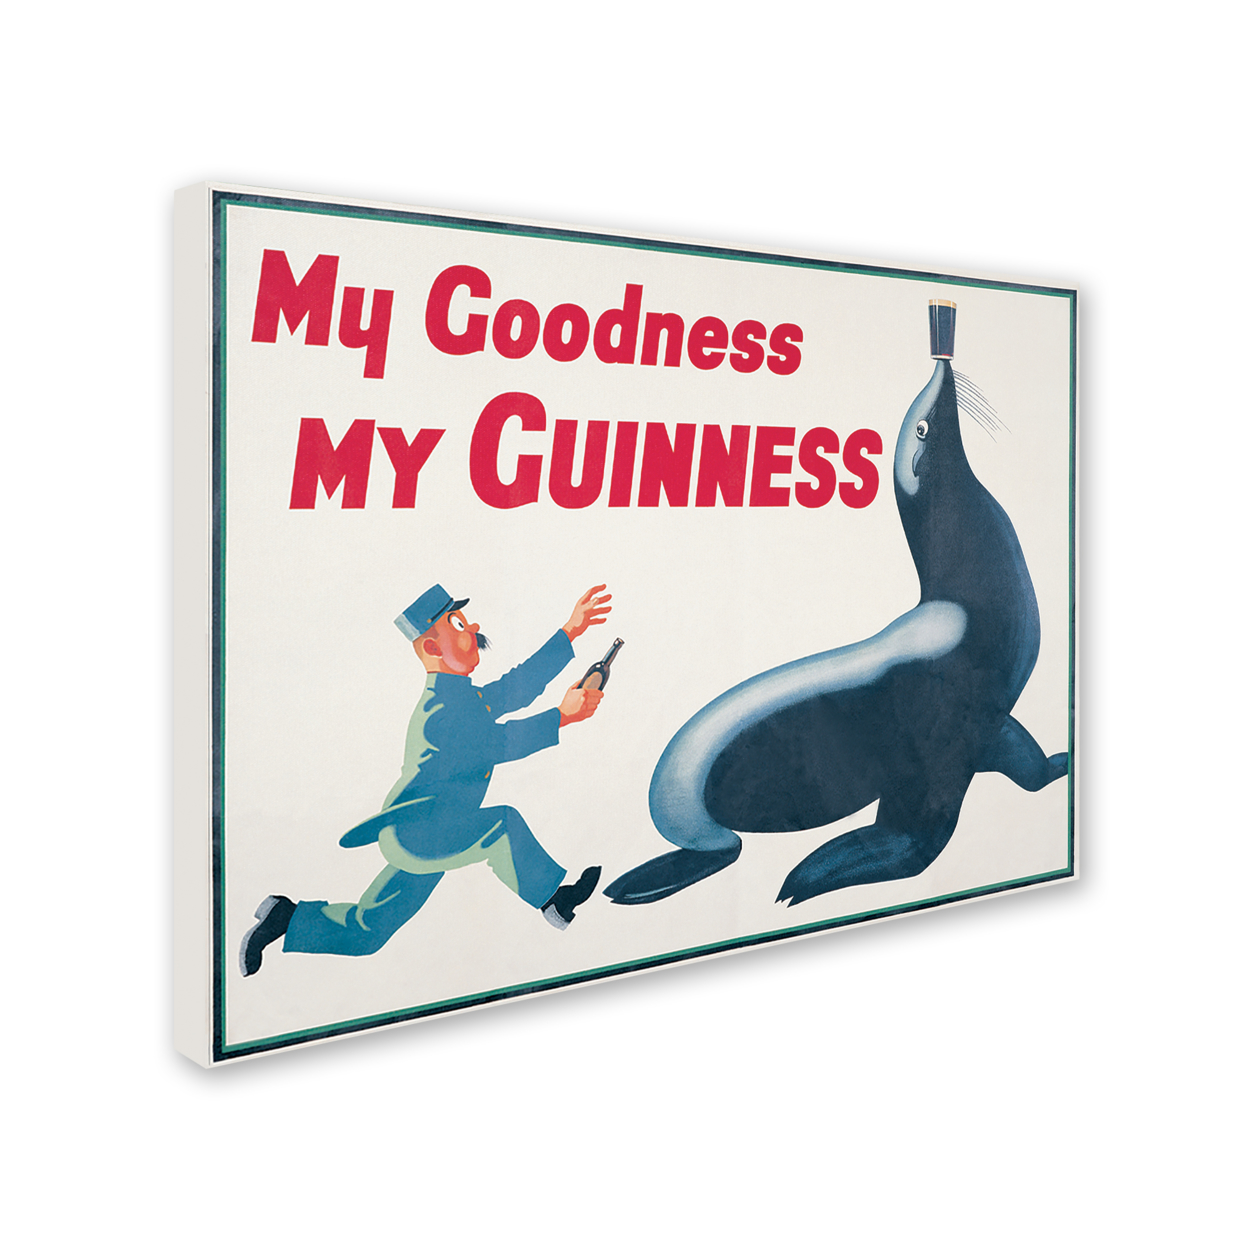 Guinness Brewery 'My Goodness My Guinness II' 14 X 19 Canvas Art